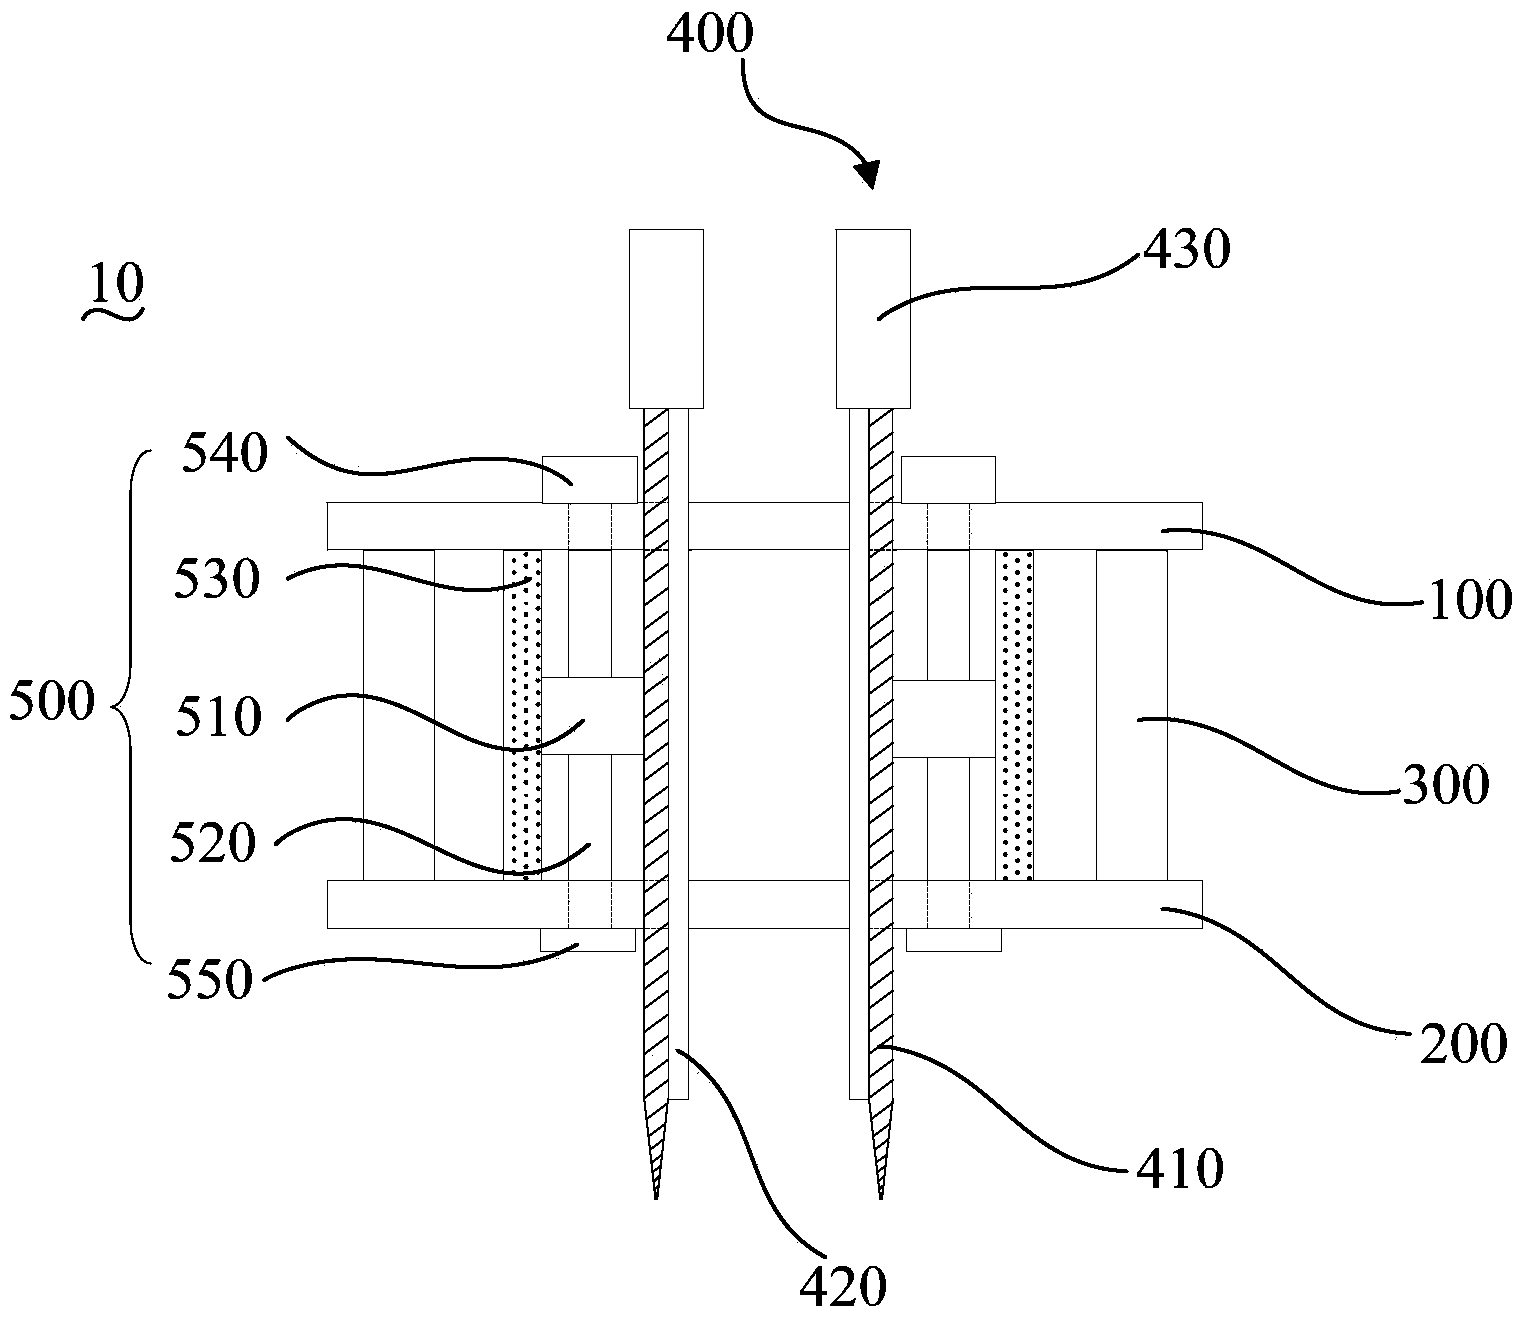 Electrophysiology recording device